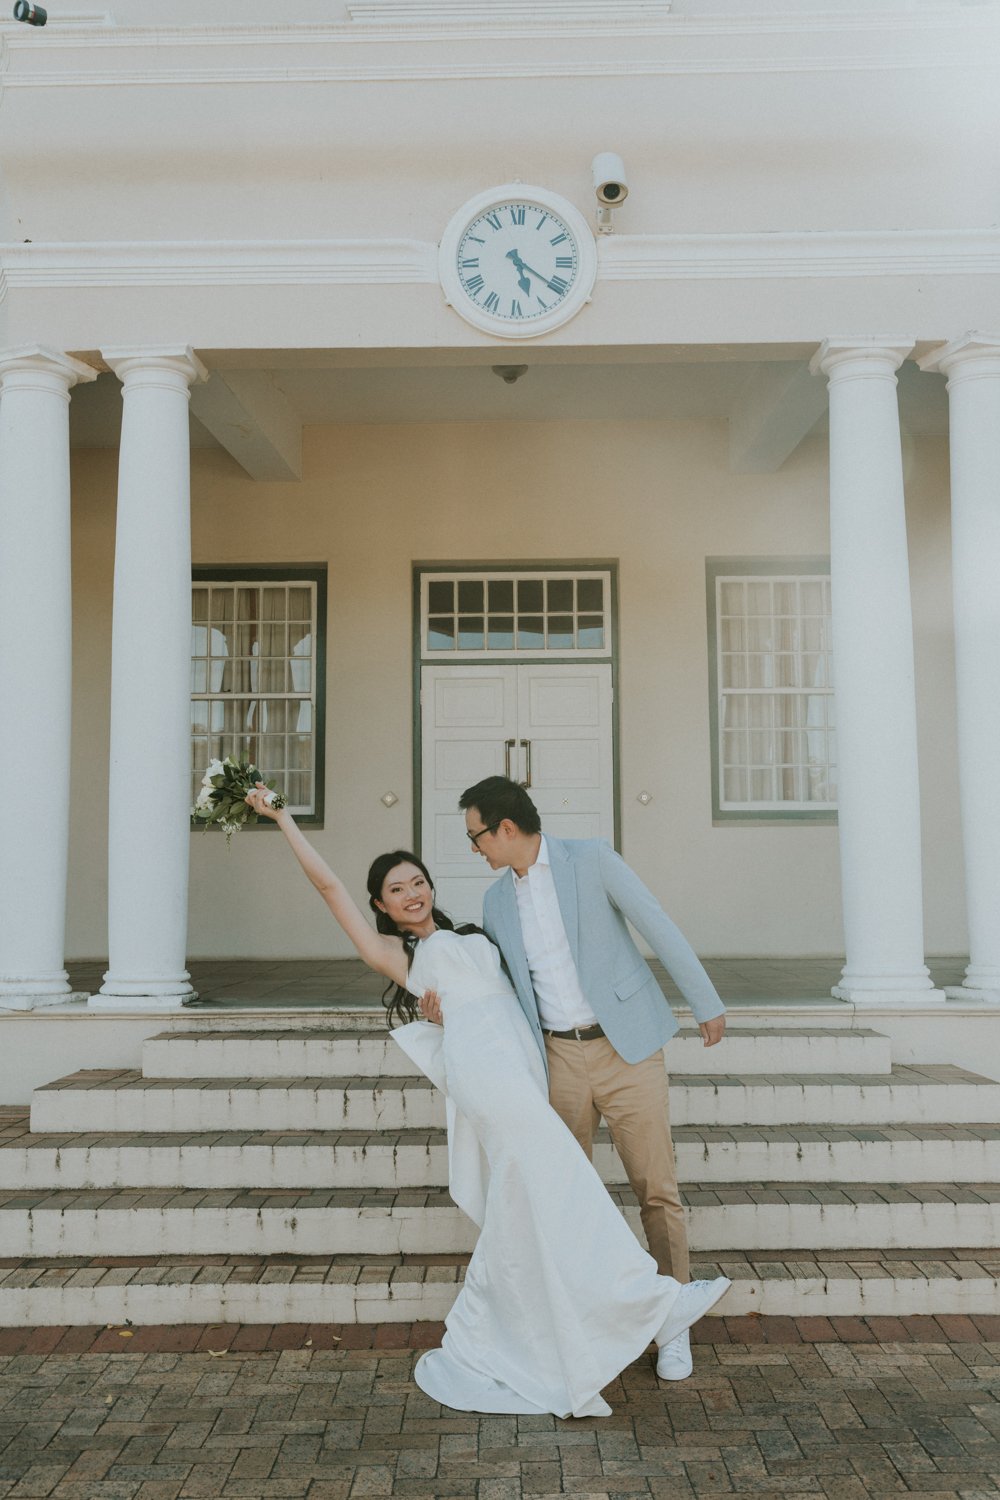 Wedding Shoot in Cape Town - Bianca Asher Photography-27.jpg